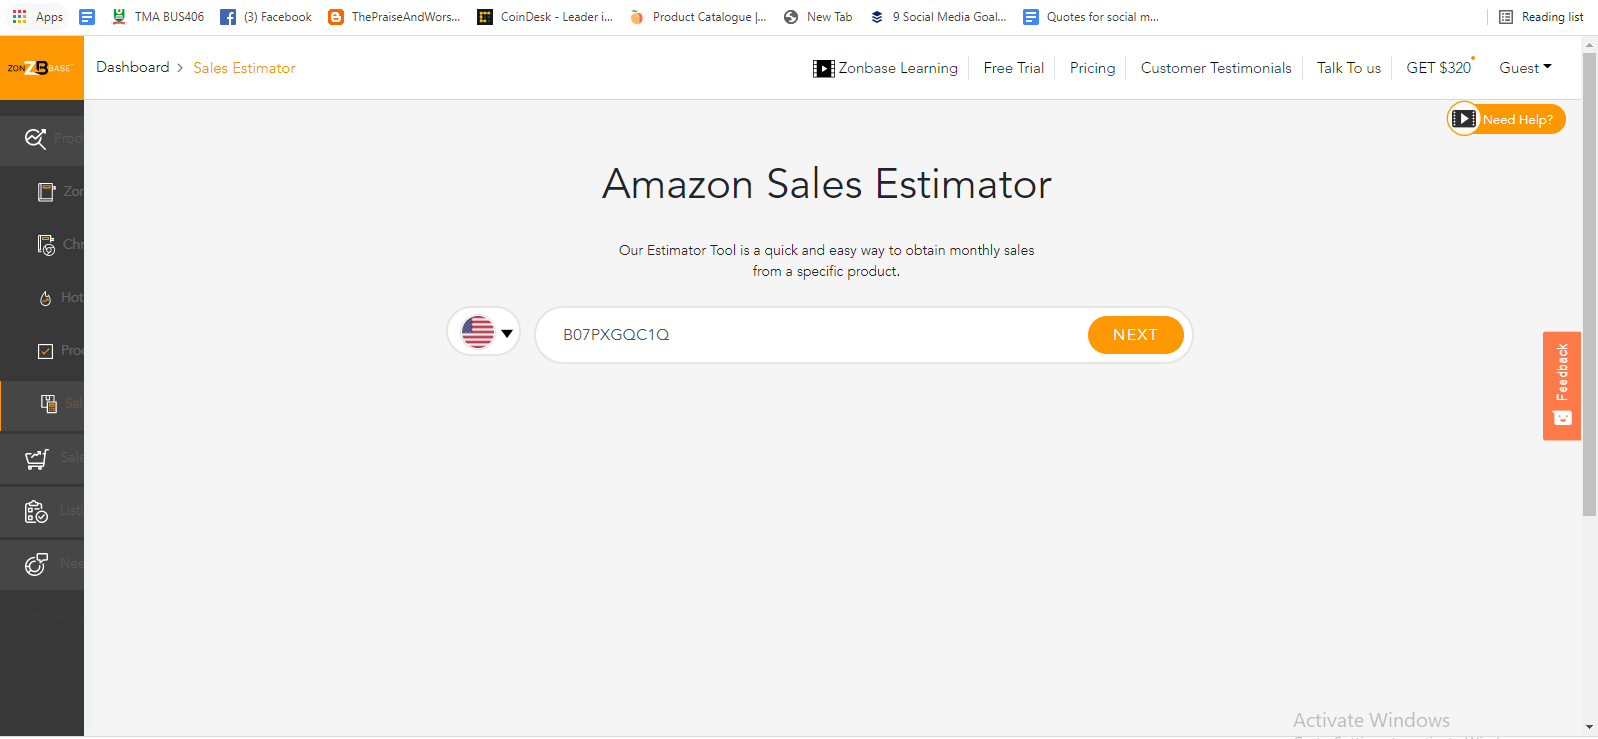 How to Price your Products on Amazon: 5 Trusted Tips